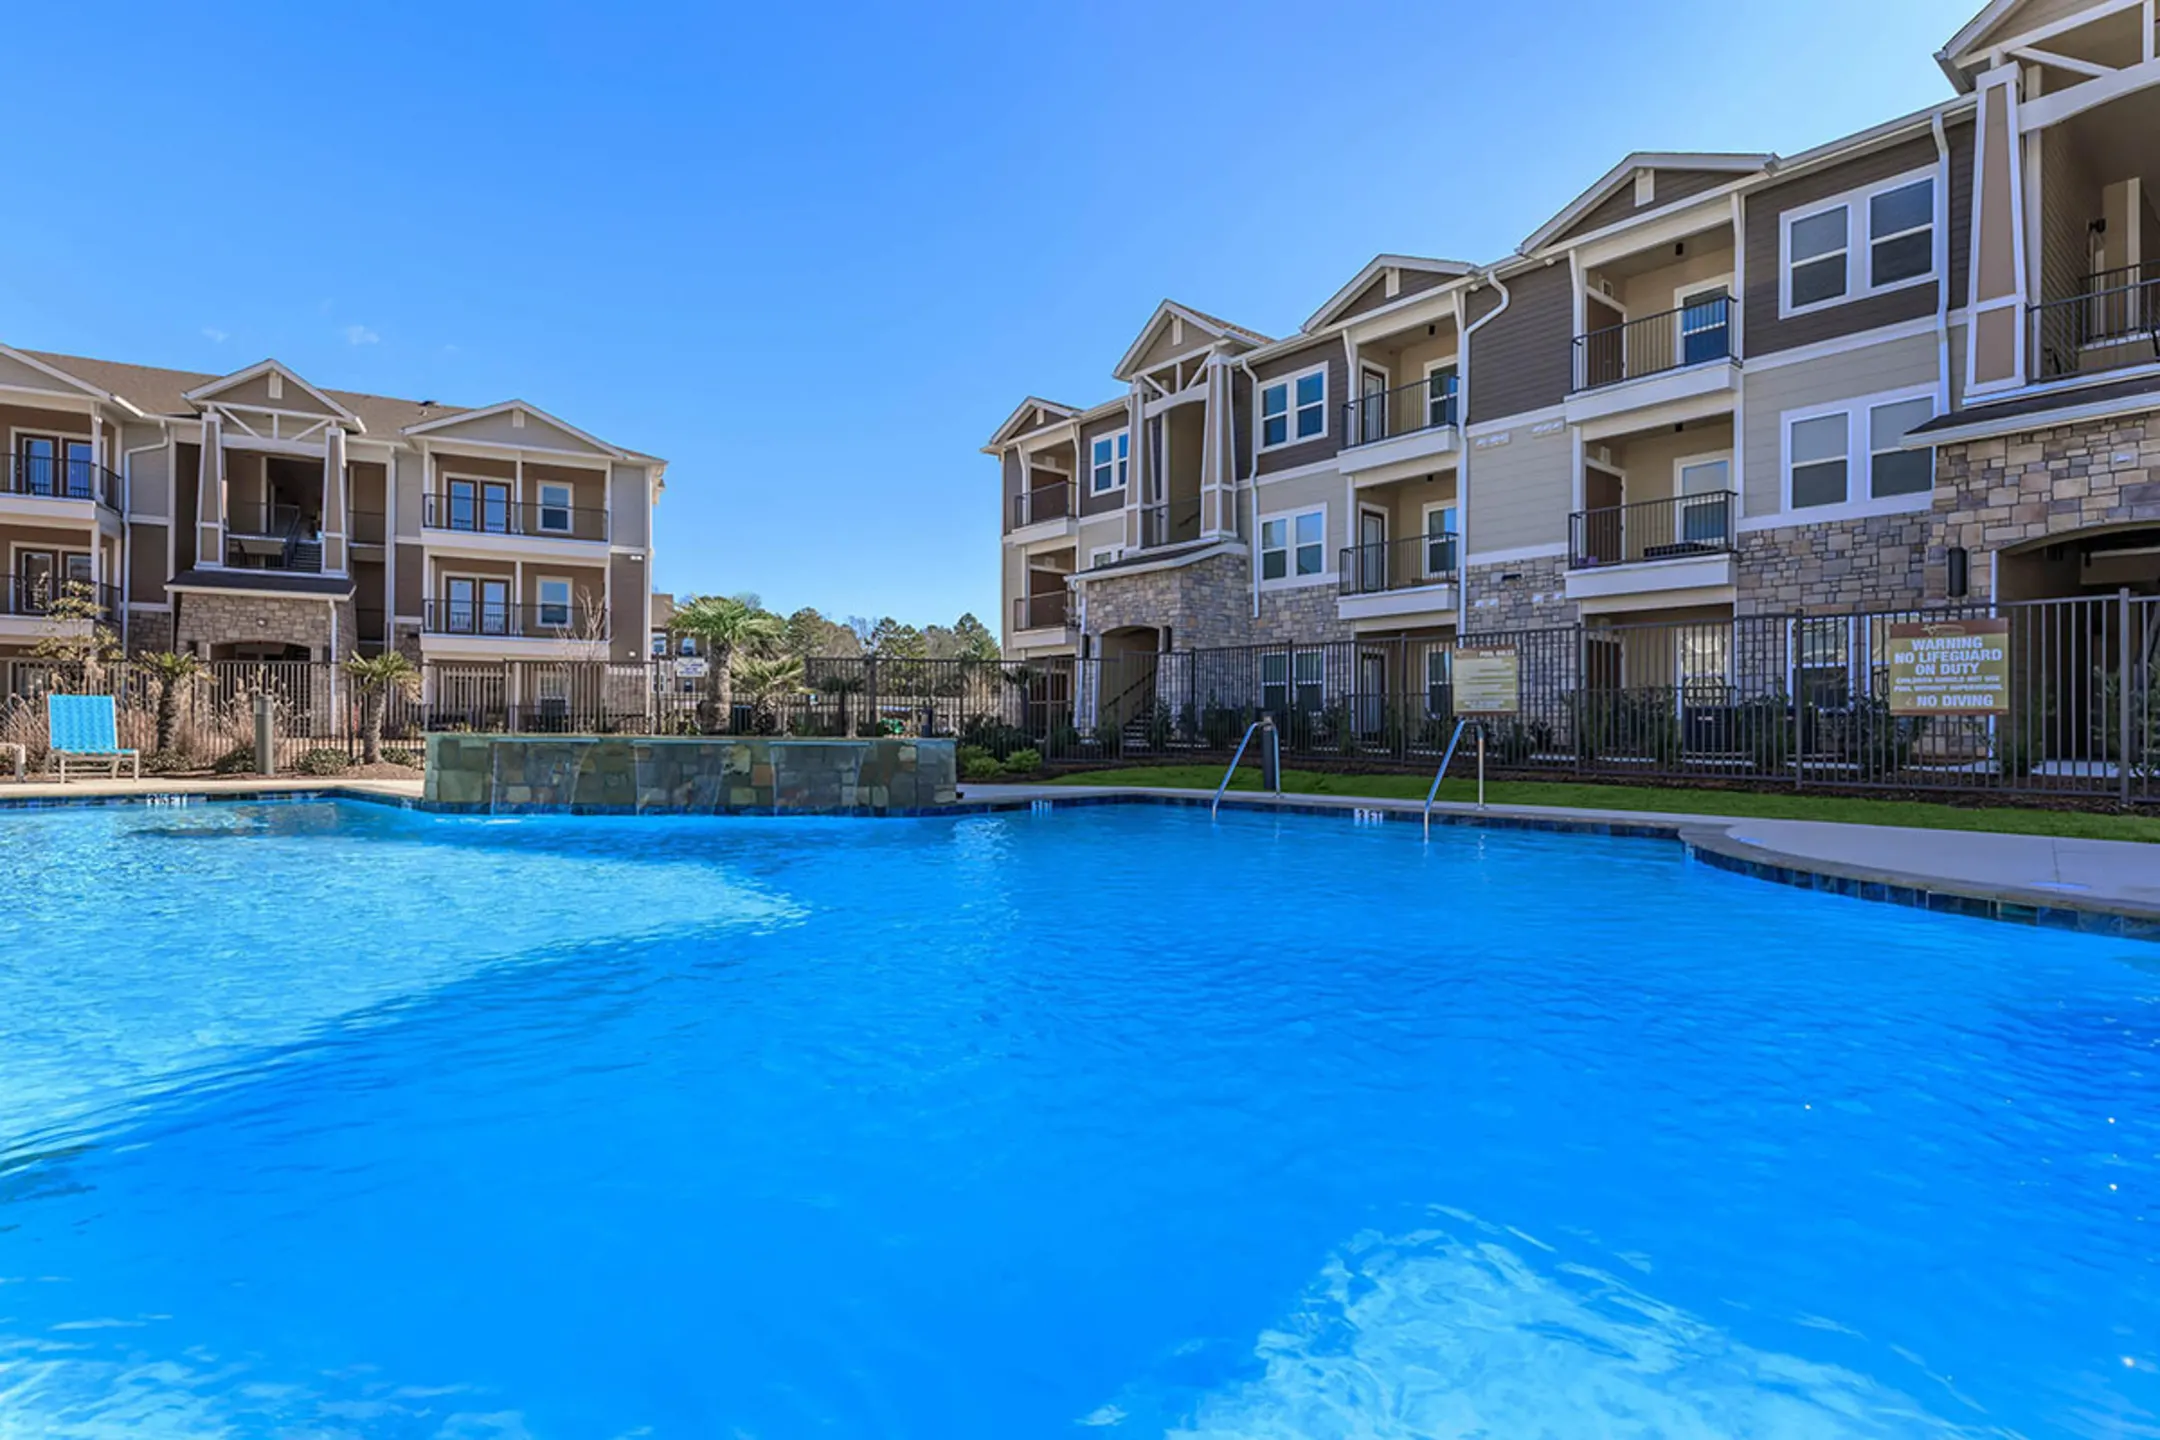 Pool - Pointe at Greenville Apartments - Greenville, SC